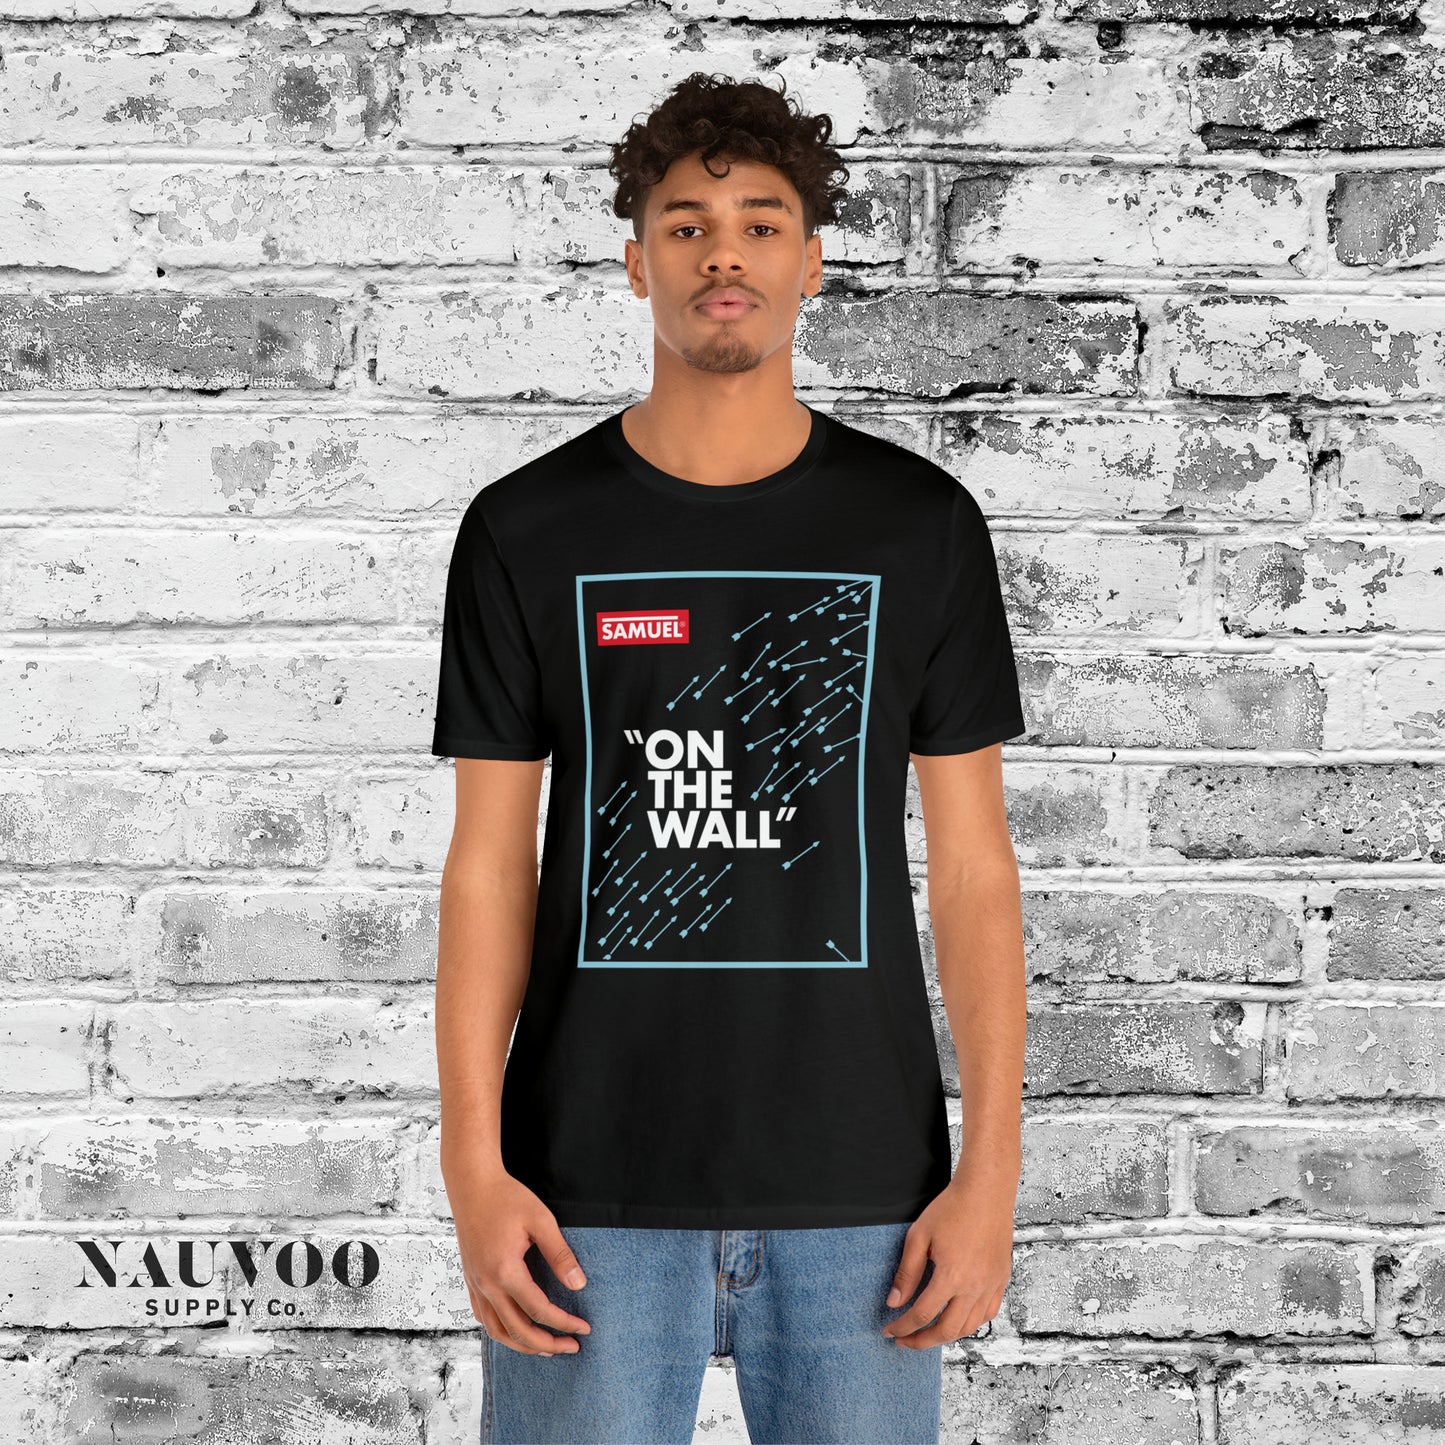 Samuel “On the Wall“ Book of Mormon T-Shirt